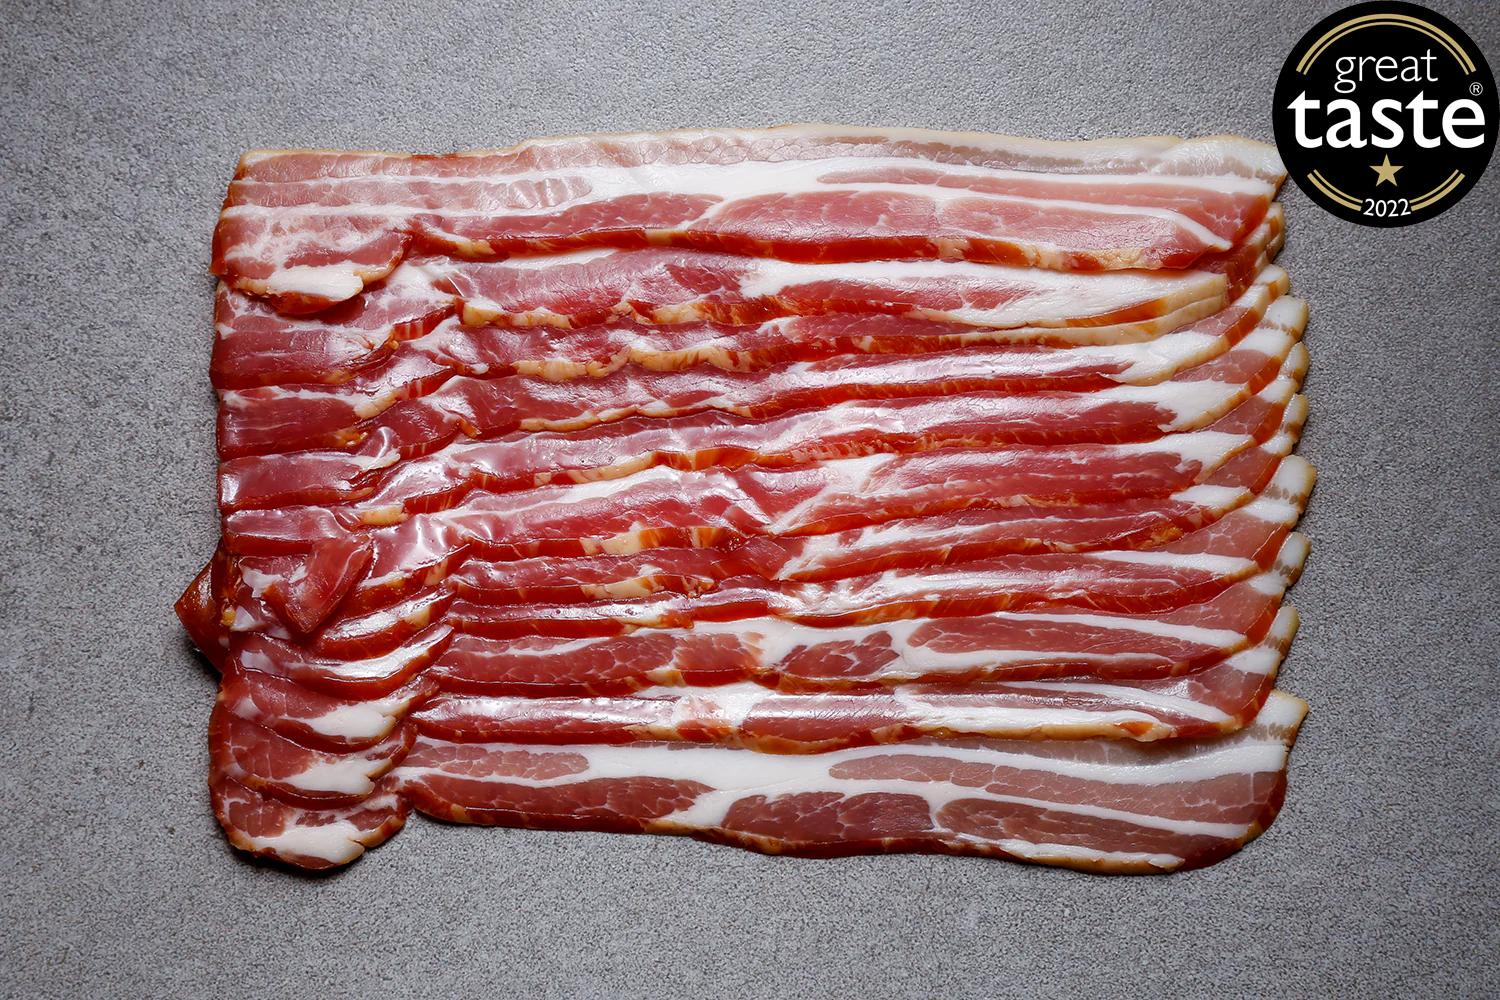 smoked streaky bacon - What is a type of streaky bacon called